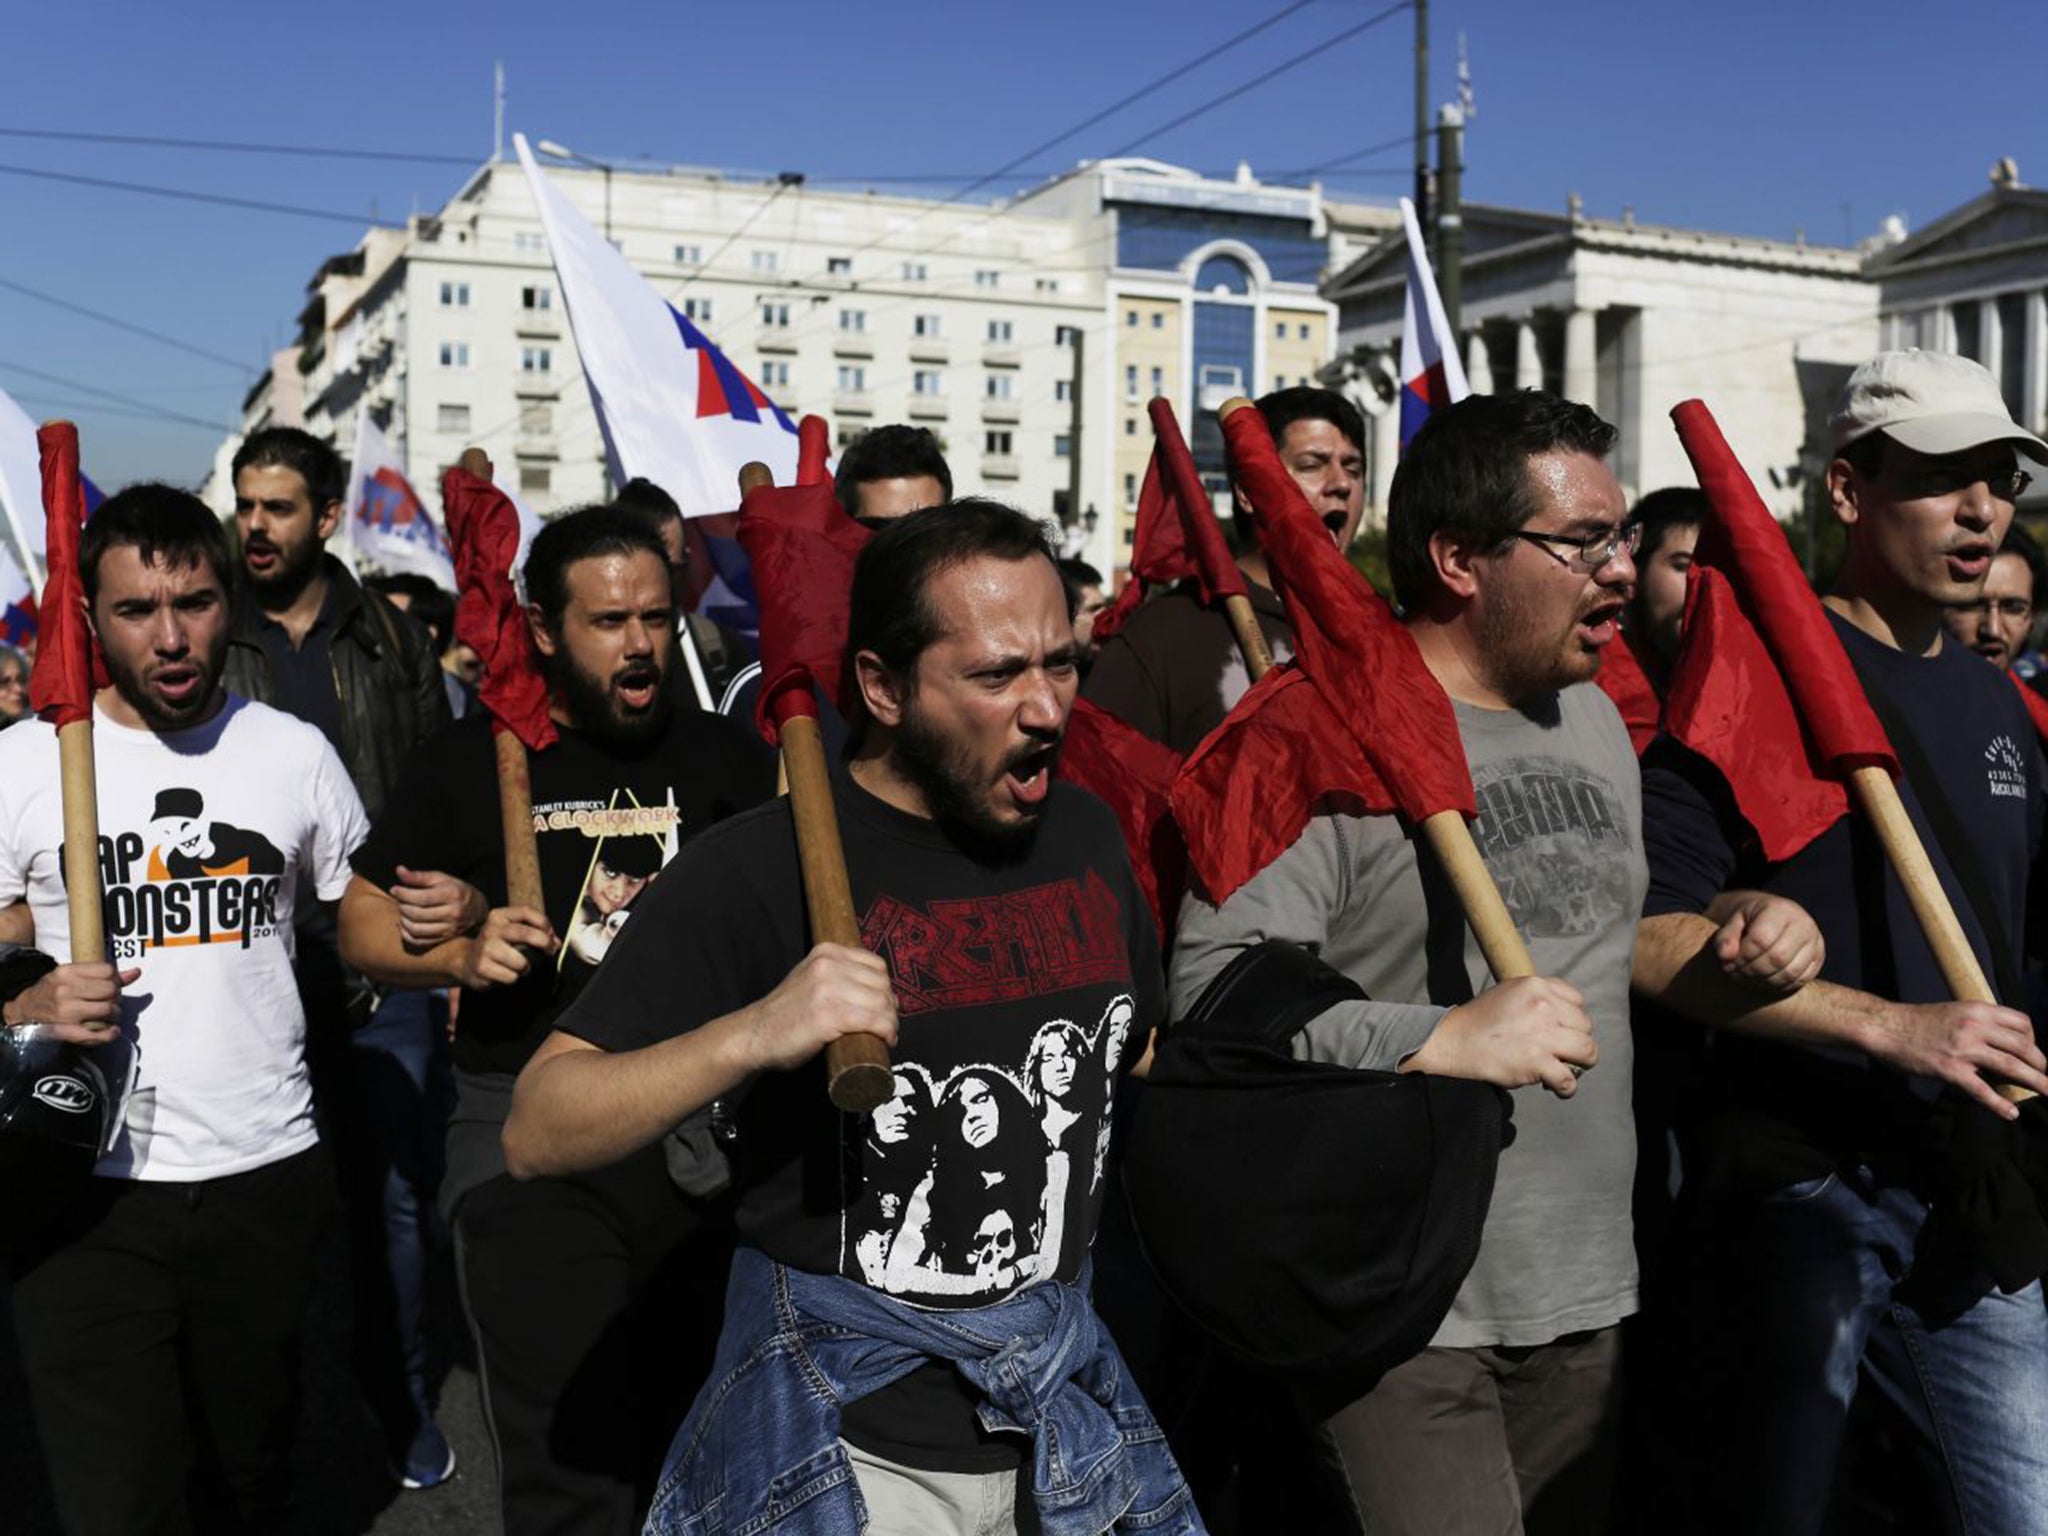 Union members protest against further austerity measures during a nationwide general strike in Athens in which youths clashed with riot police